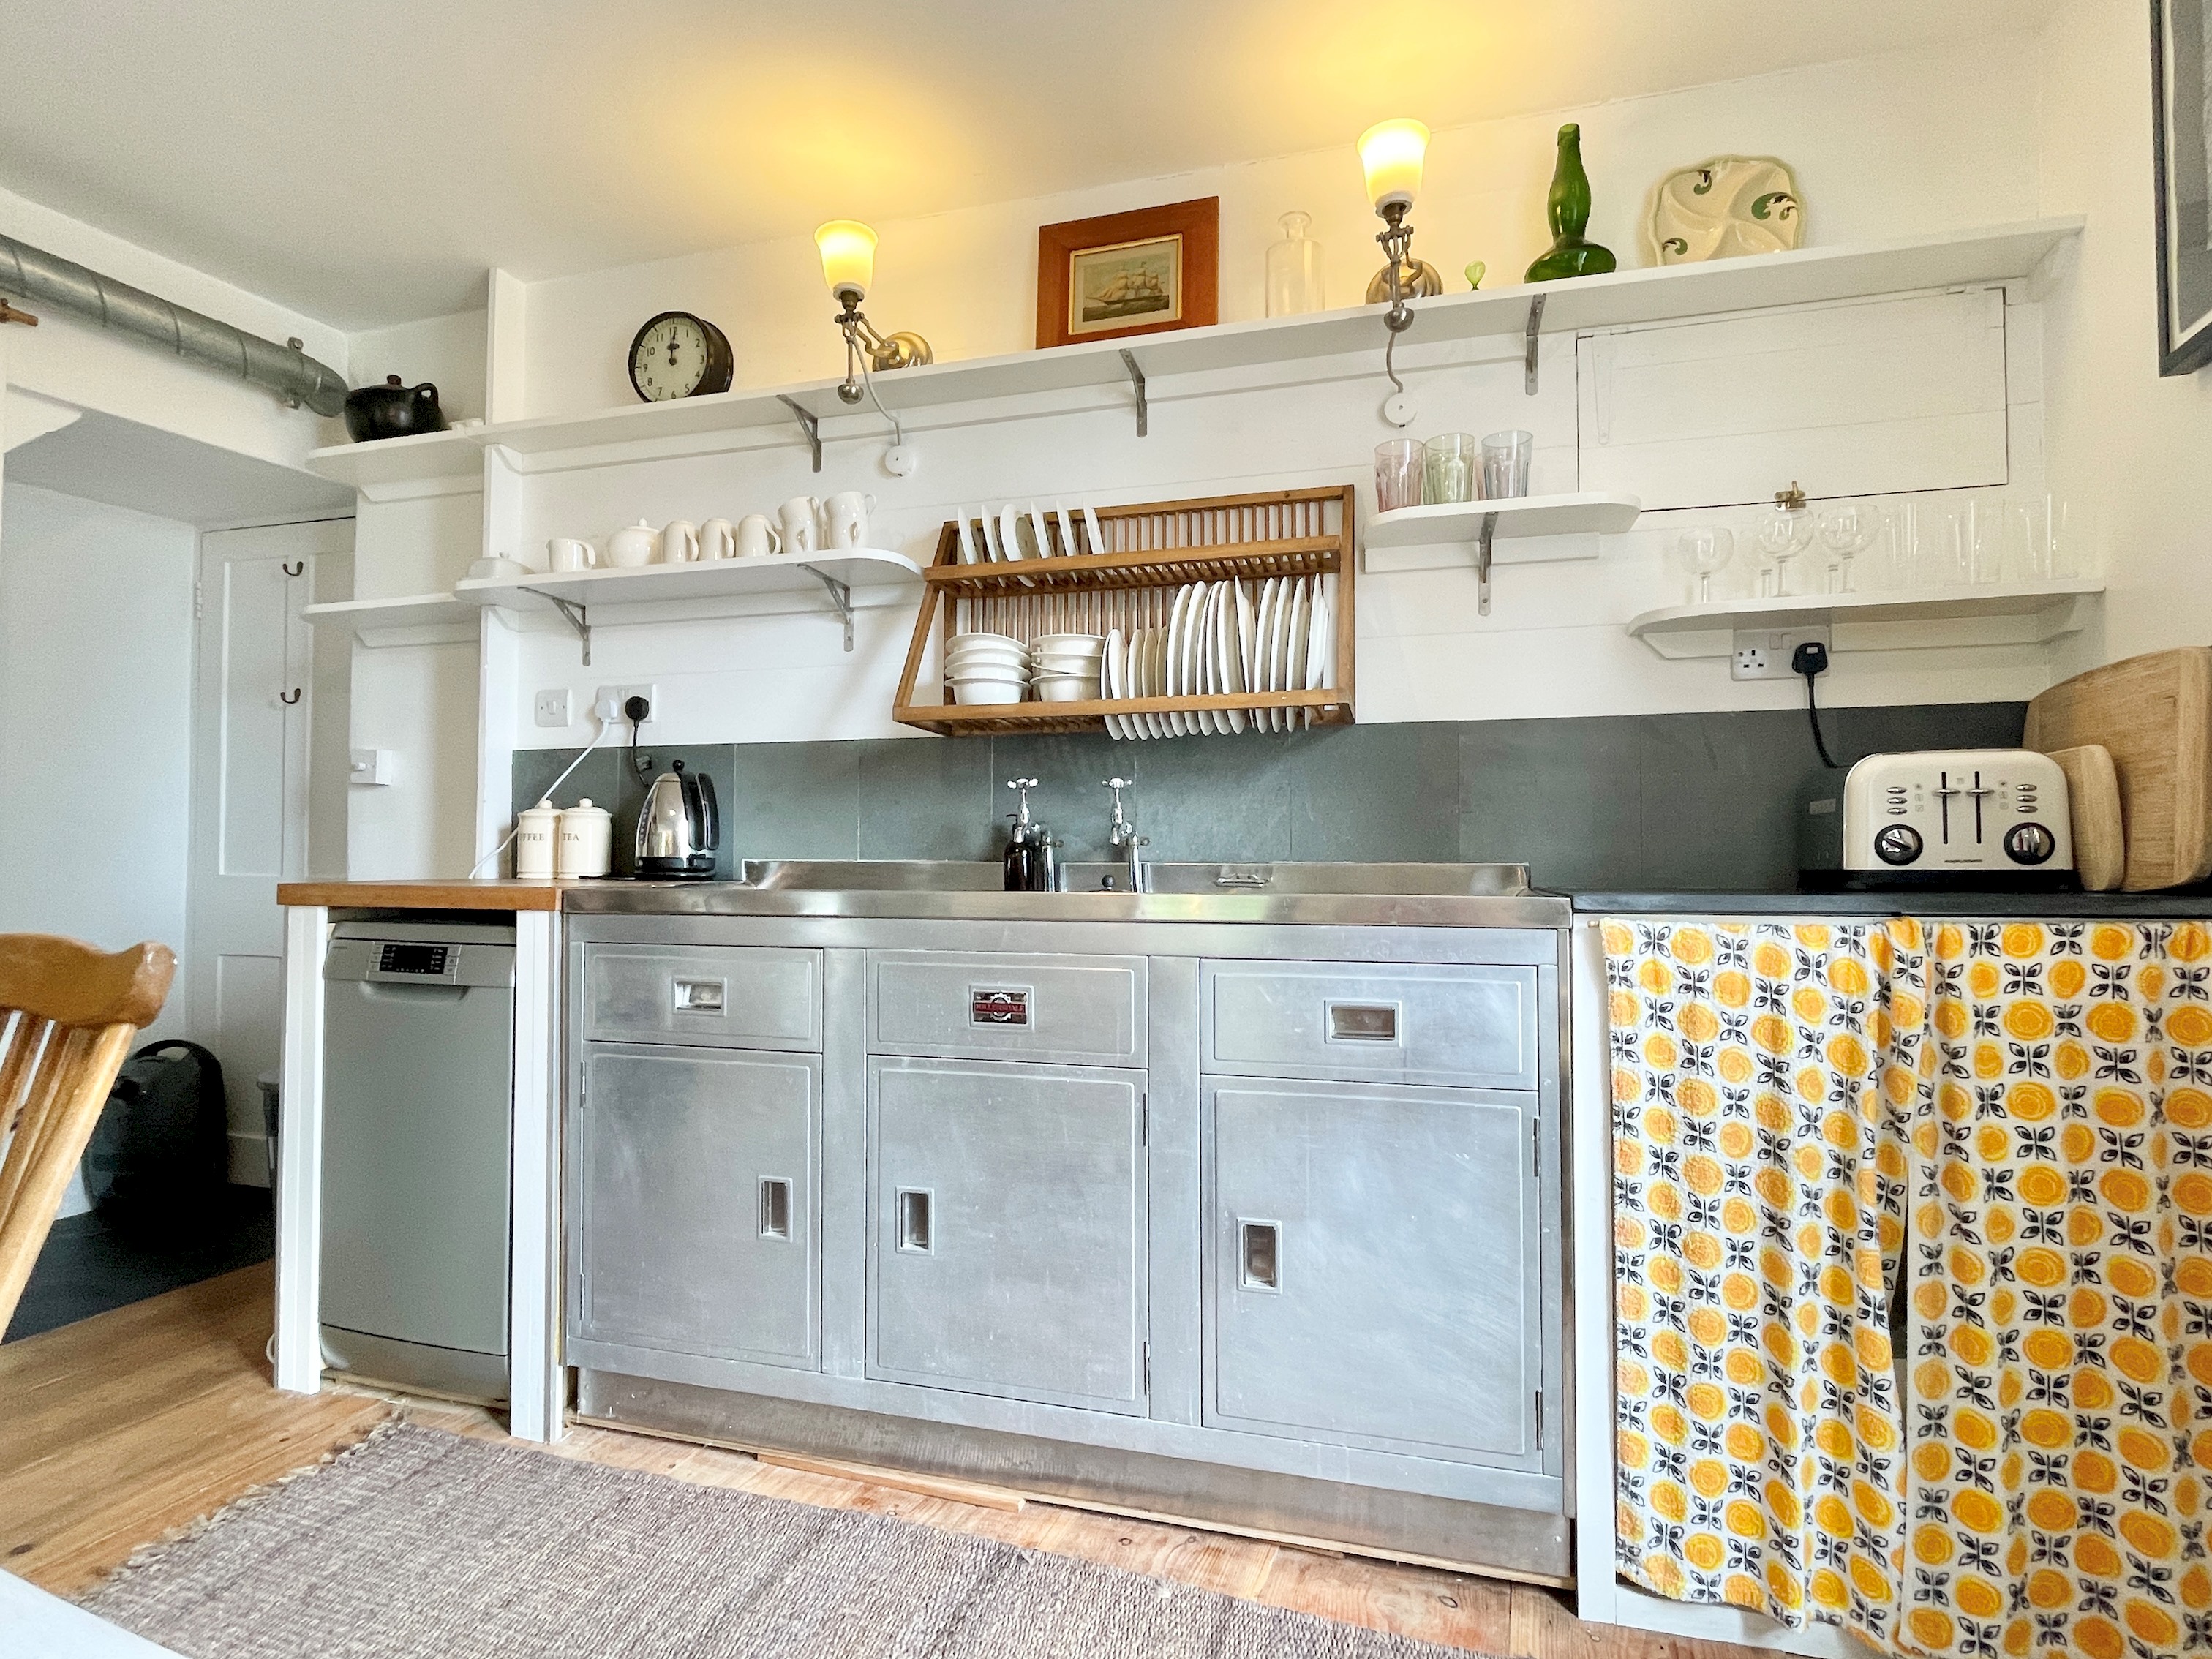 Janies cottage Mousehole Eclectic Interiors